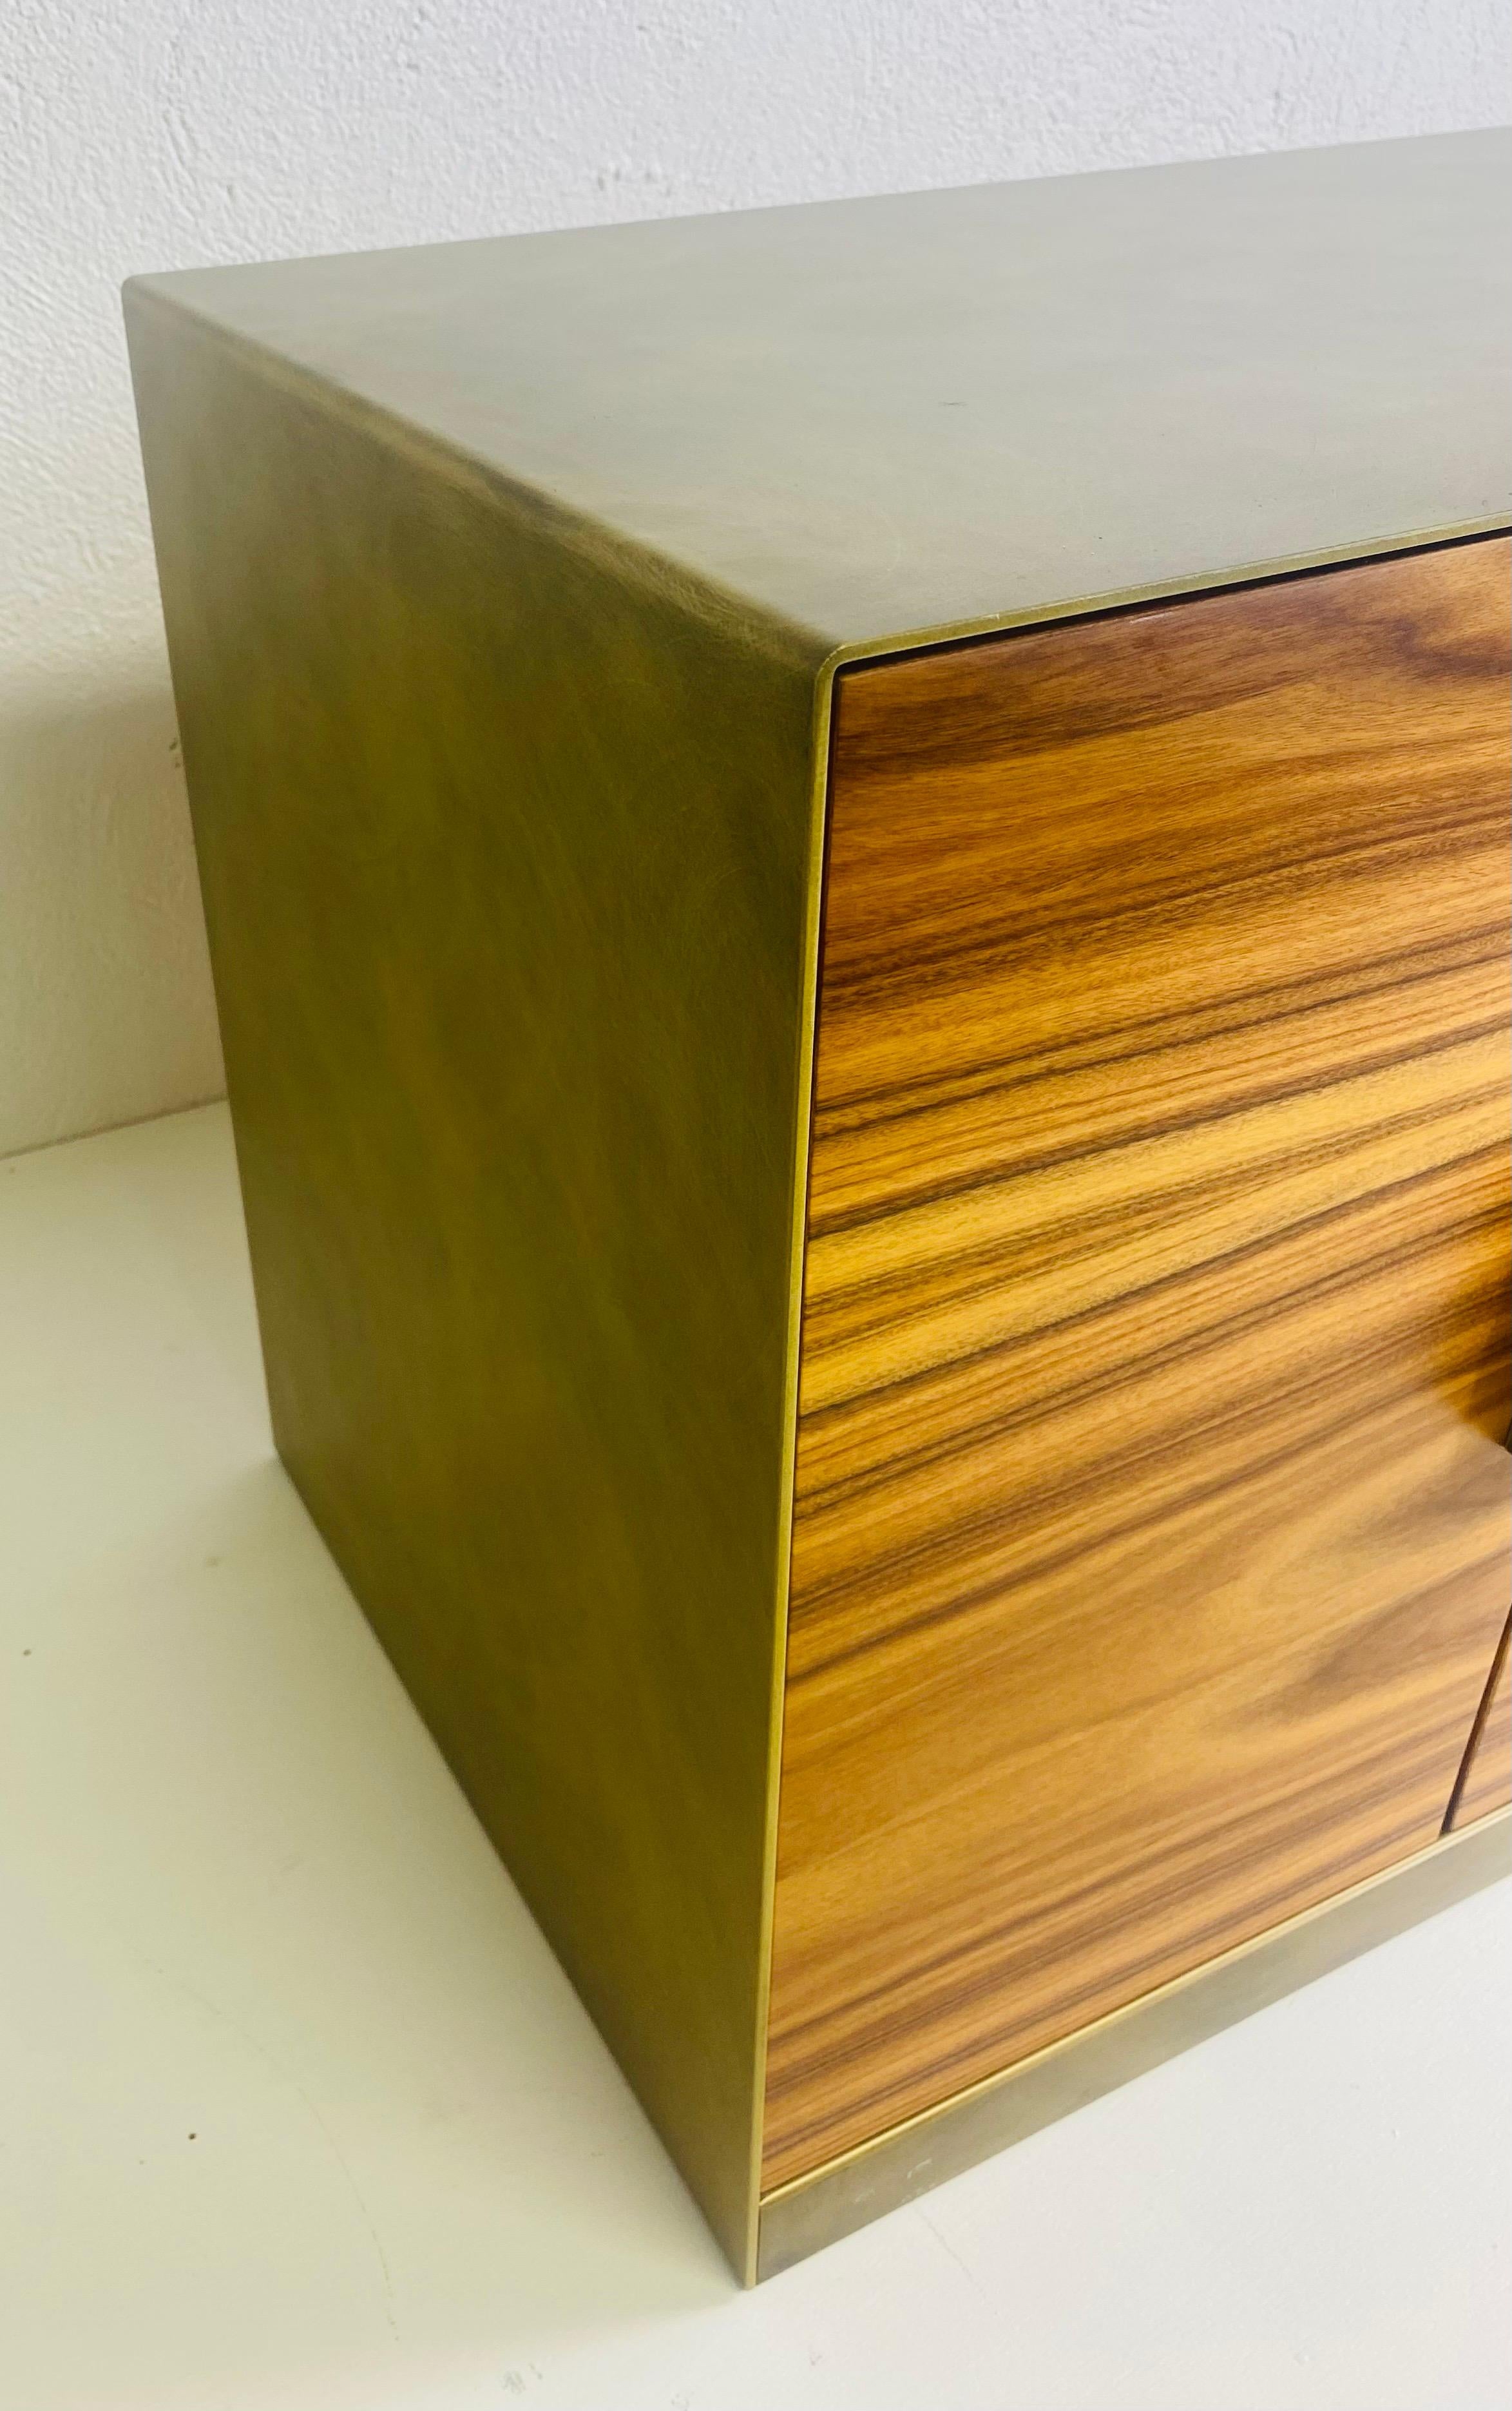 This is a late 20th century vintage Italian design zebra wood four-door chest. This Italian chest has a bronze waterfall design with zebra wood at the front and on the back. This chest is perfect for a side table or nightstand. This chest is Italian